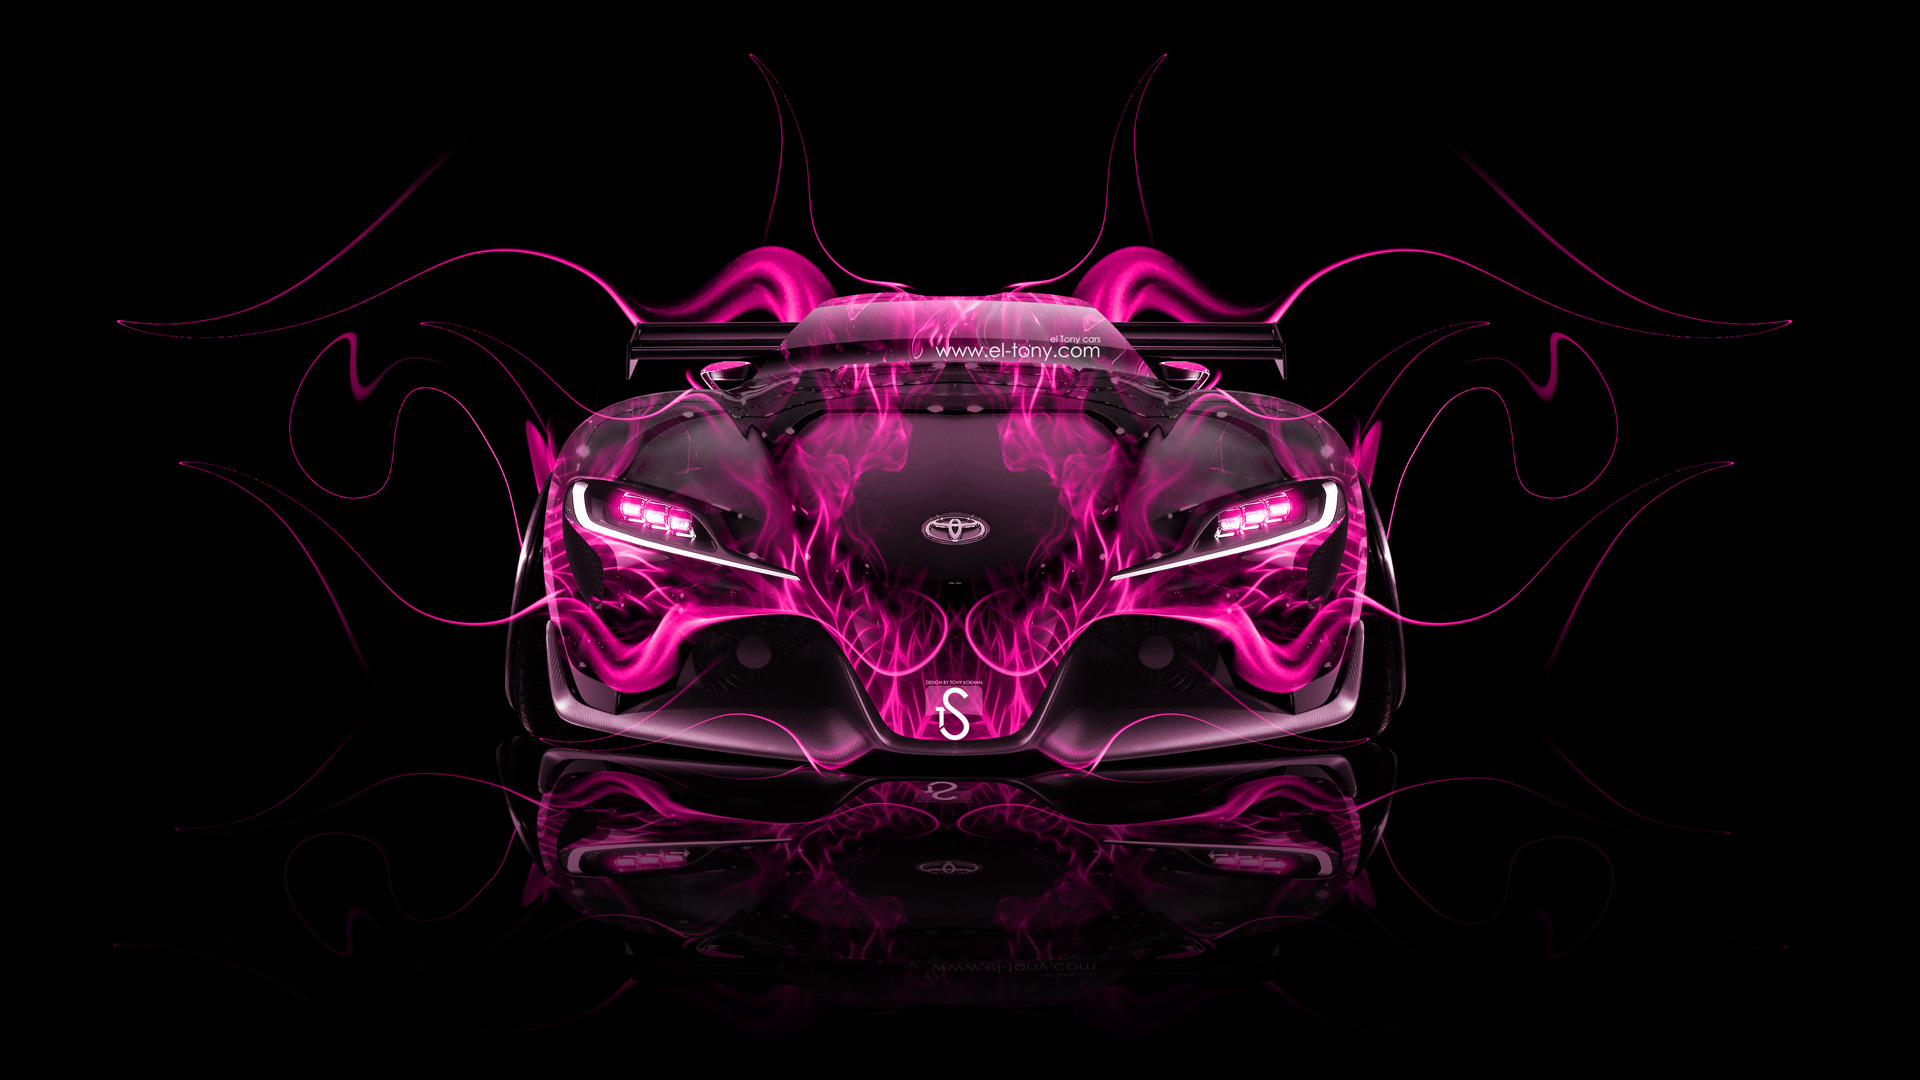 Toyota-FT-1-Tuning-Front-Pink-Fire-Car-2014-HD-Wallpapers-design-by-Tony-Kokhan-www.el-tony.com_.jpg